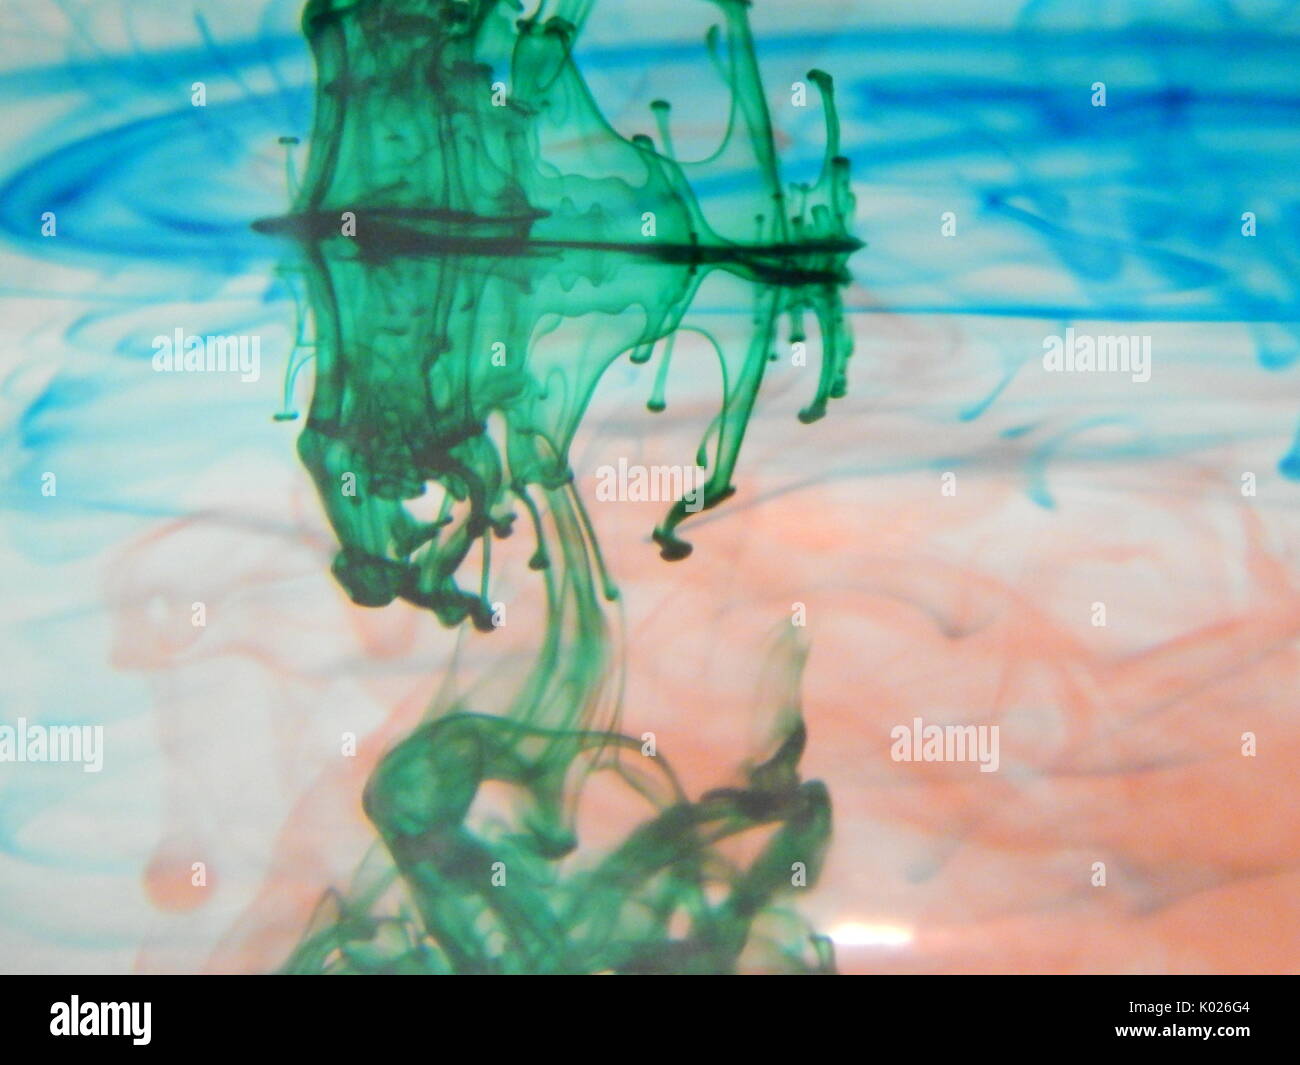 Food Coloring water experiment Stock Photo - Alamy